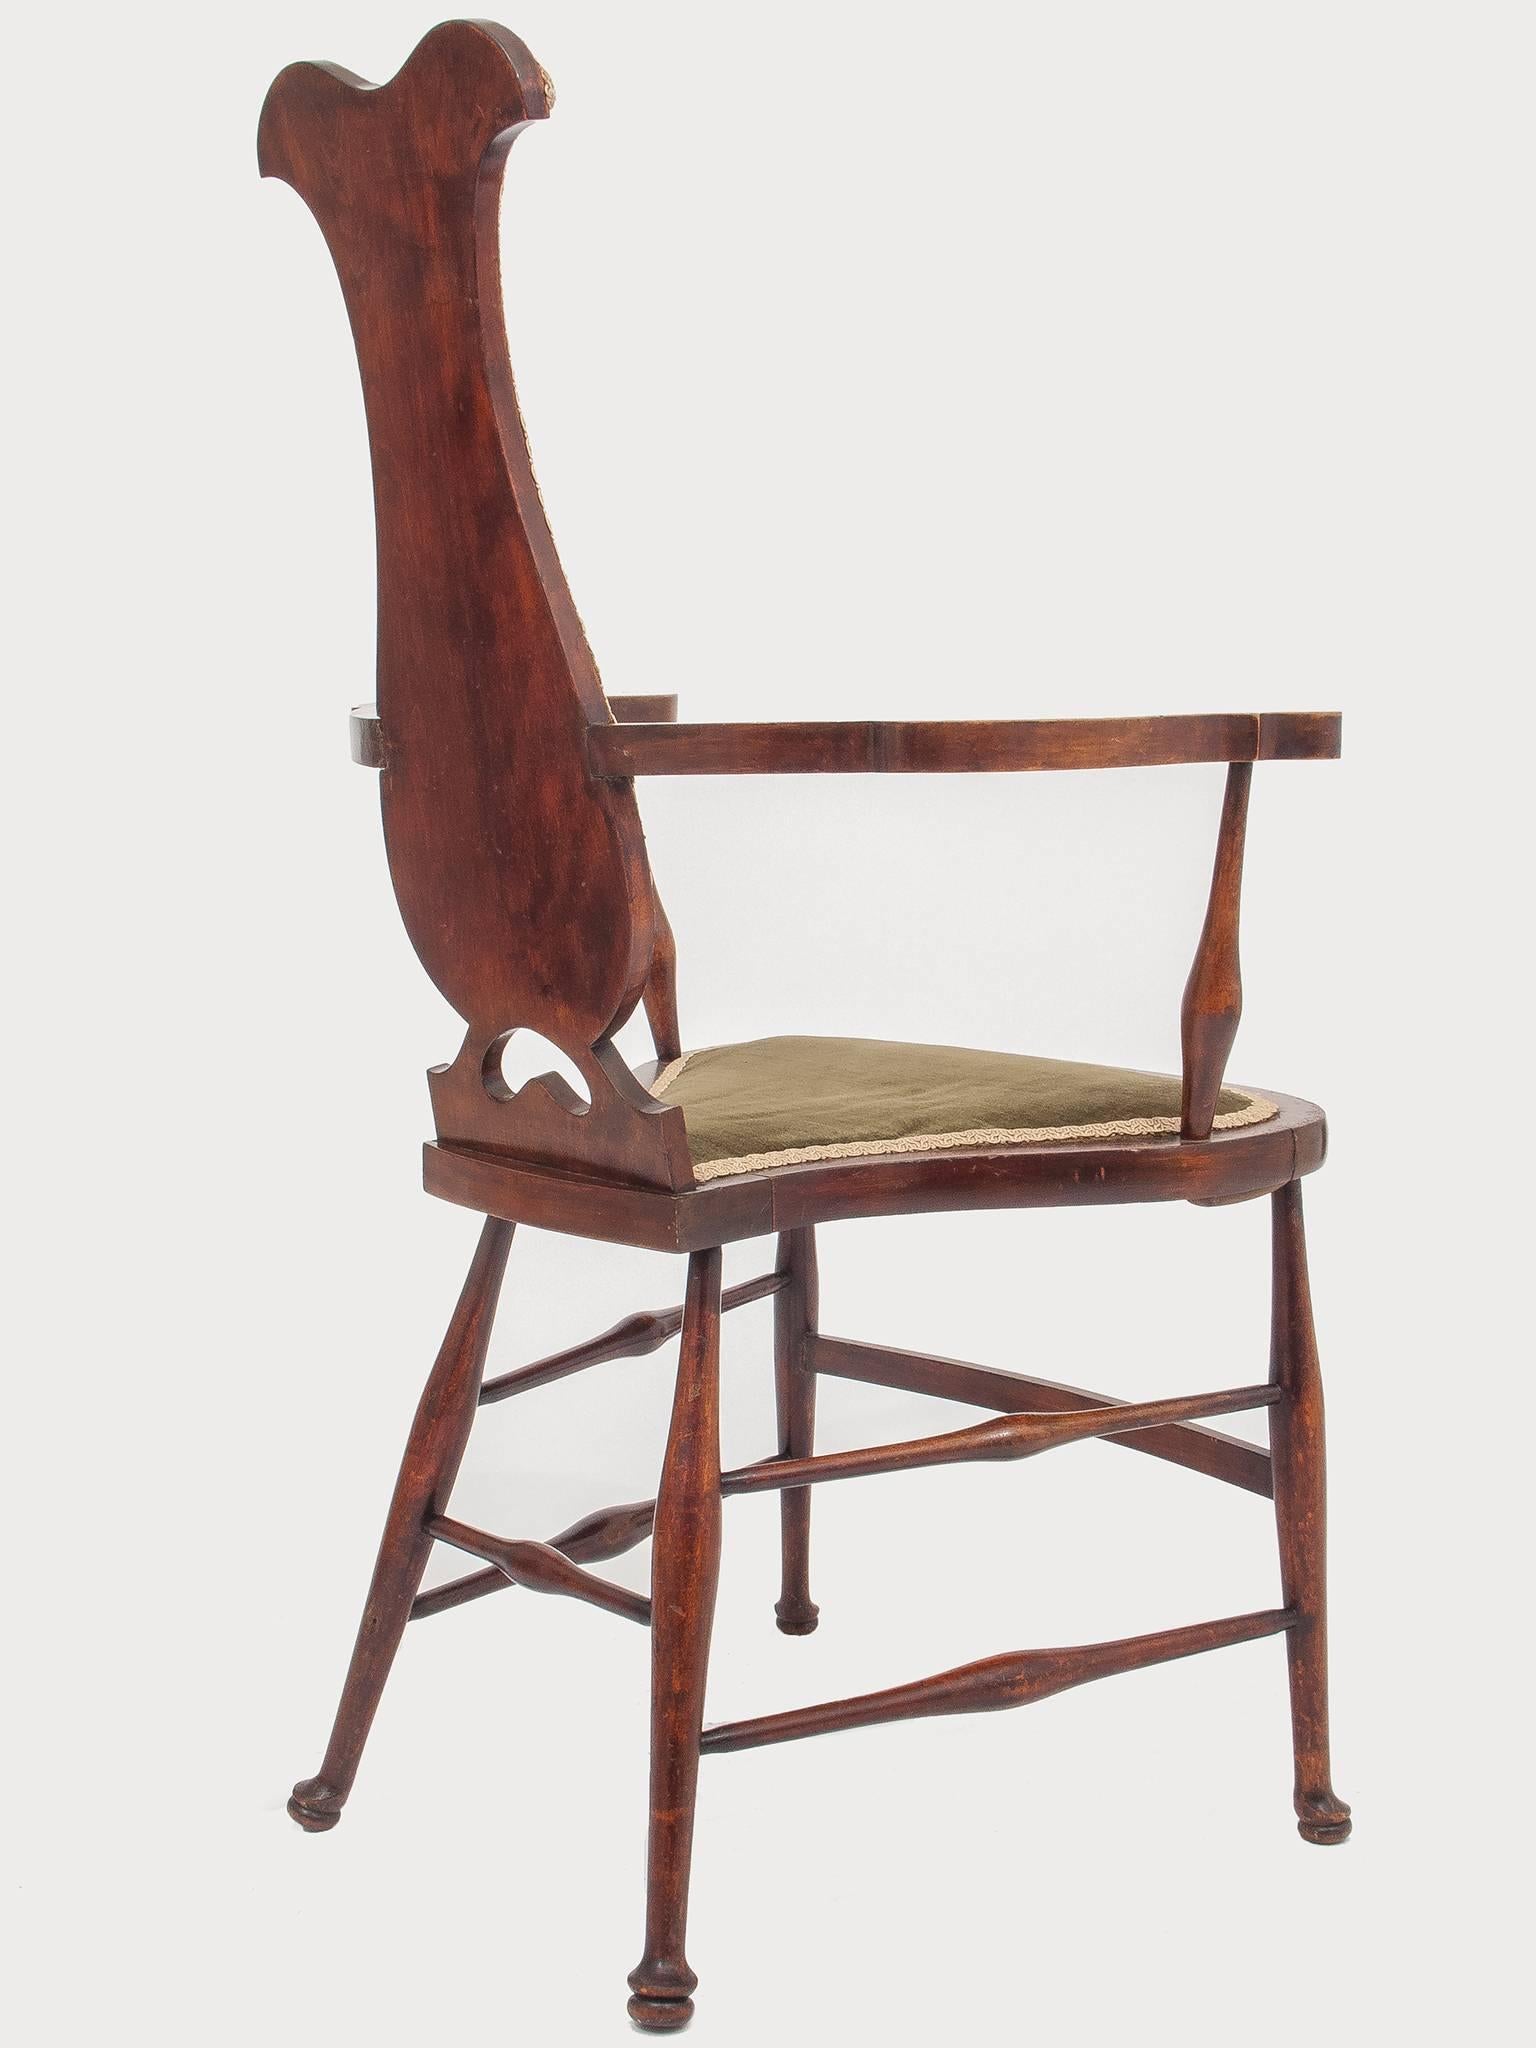 M/1753 -  Nice Edwardian English high chair, velvet coated.  Light and comfortable.
 It may be the best armchair to put in front of Your desk or on the porch to read the newspaper.